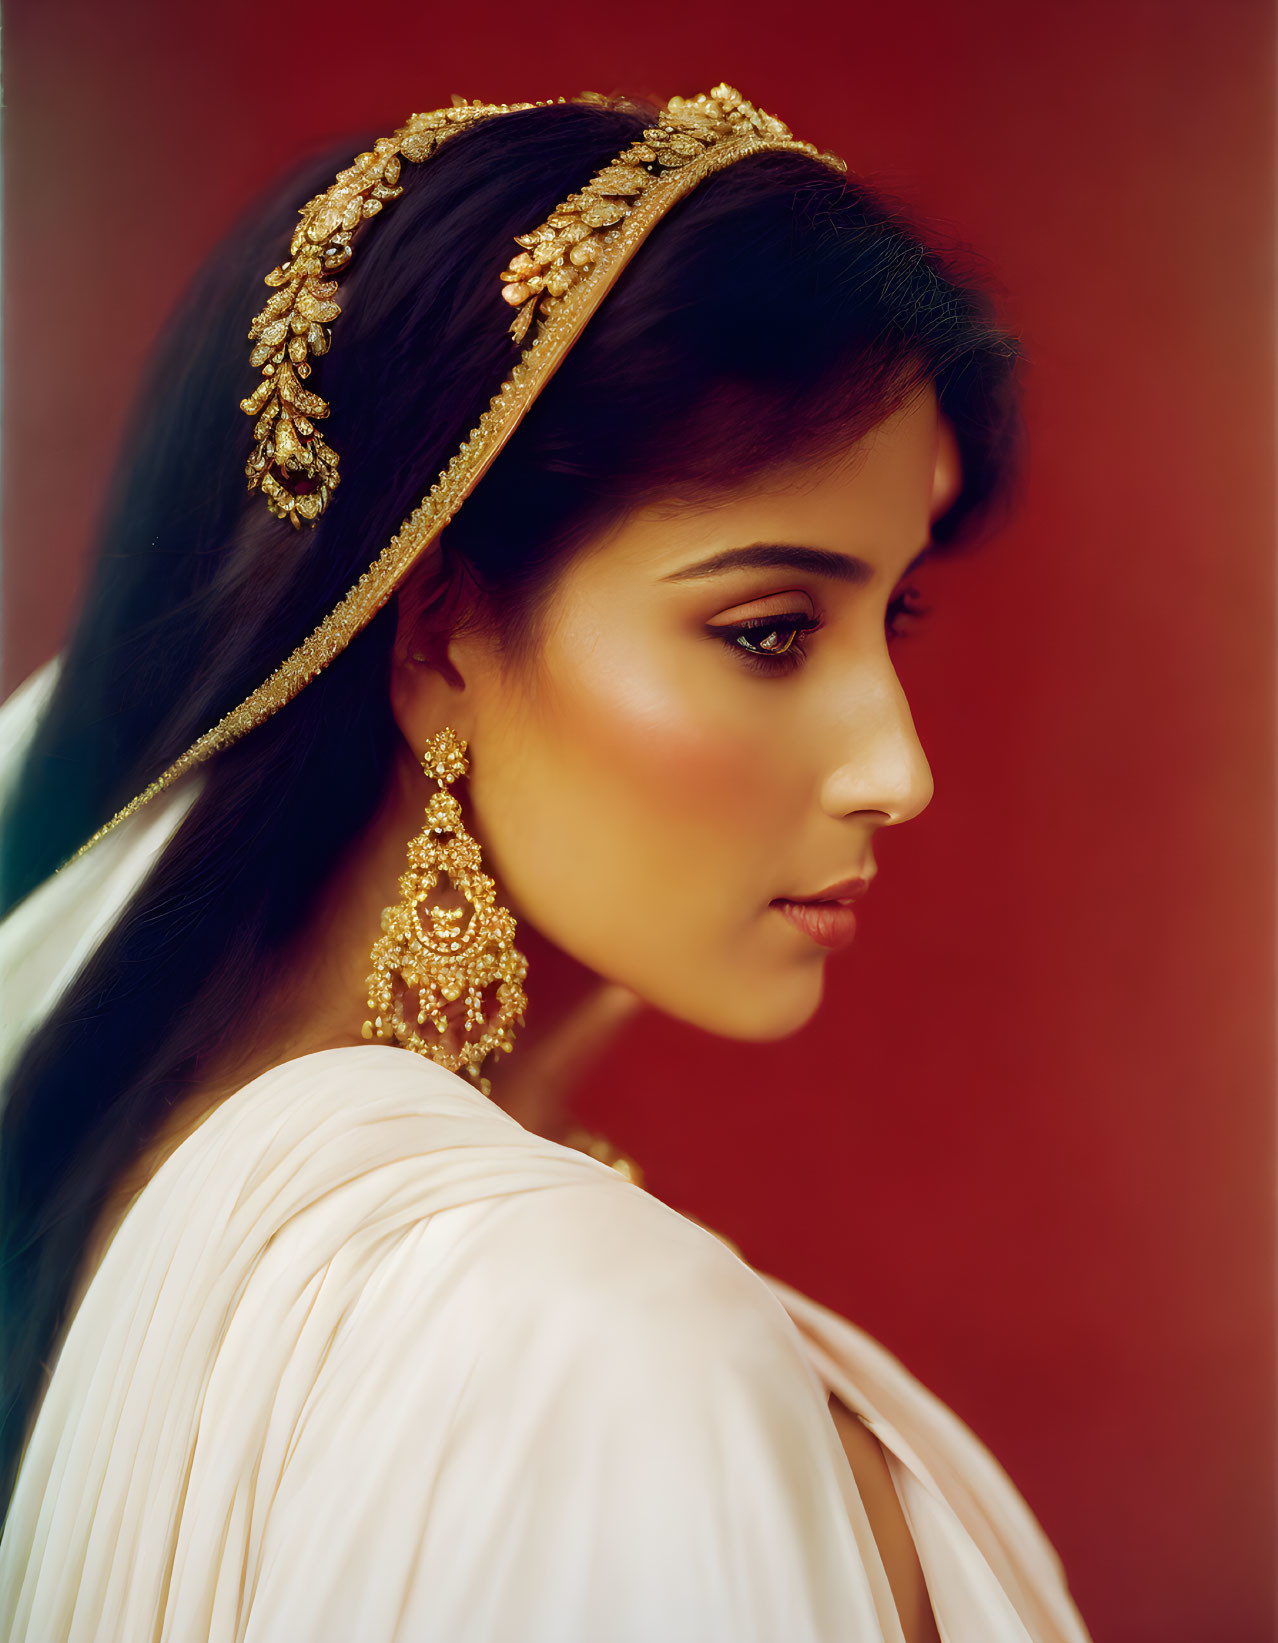 Profile of woman in gold jewelry and white attire on red backdrop